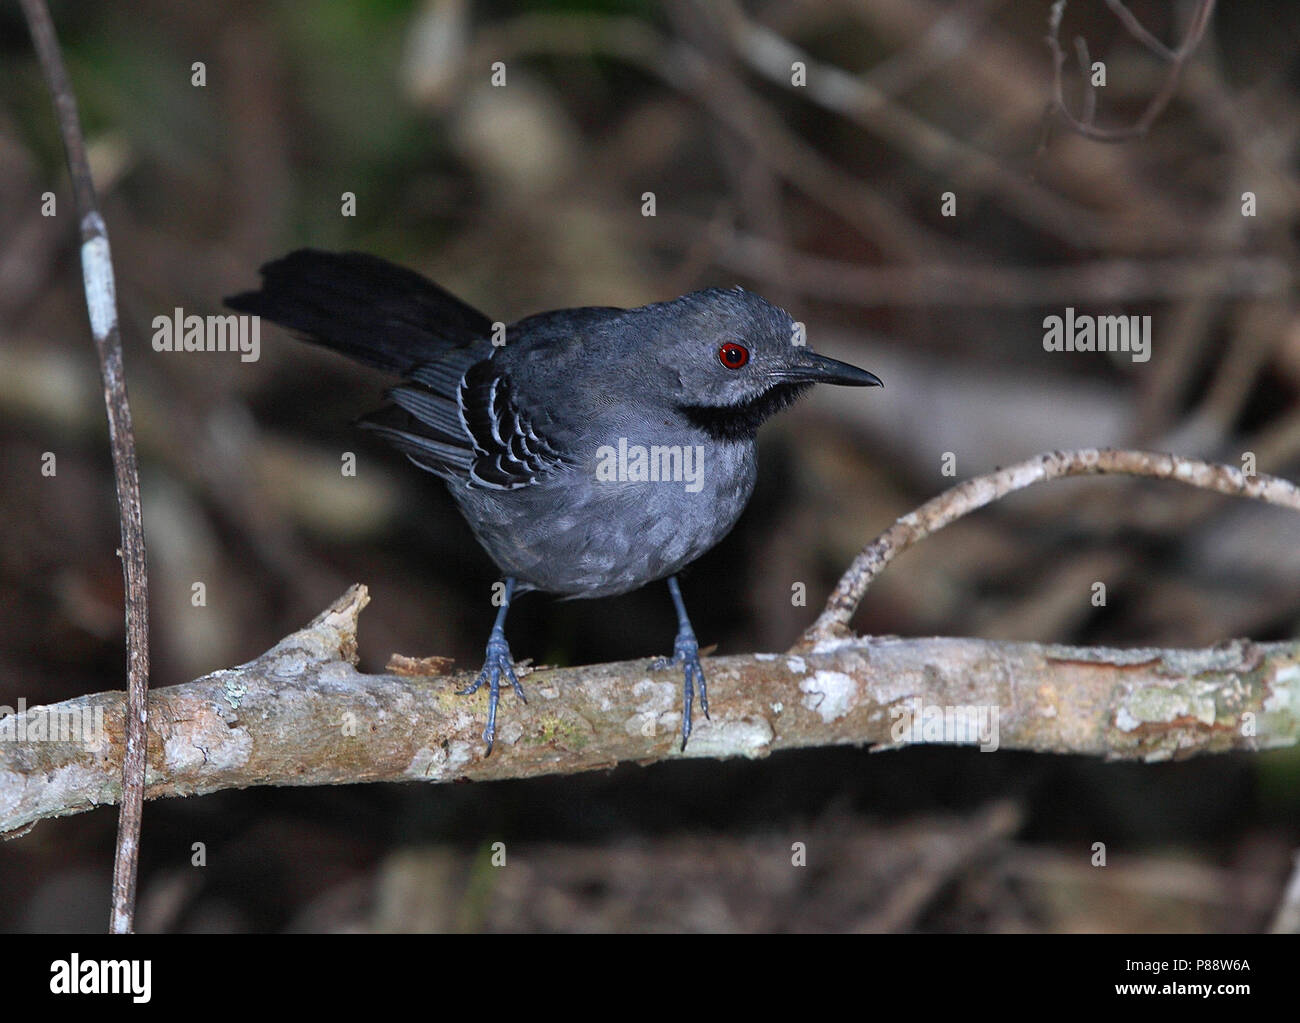 Male Slender Antbird (Rhopornis ardesiacus) a Brazilian endemic species of bird of the dry Atlantic Forests. Stock Photo